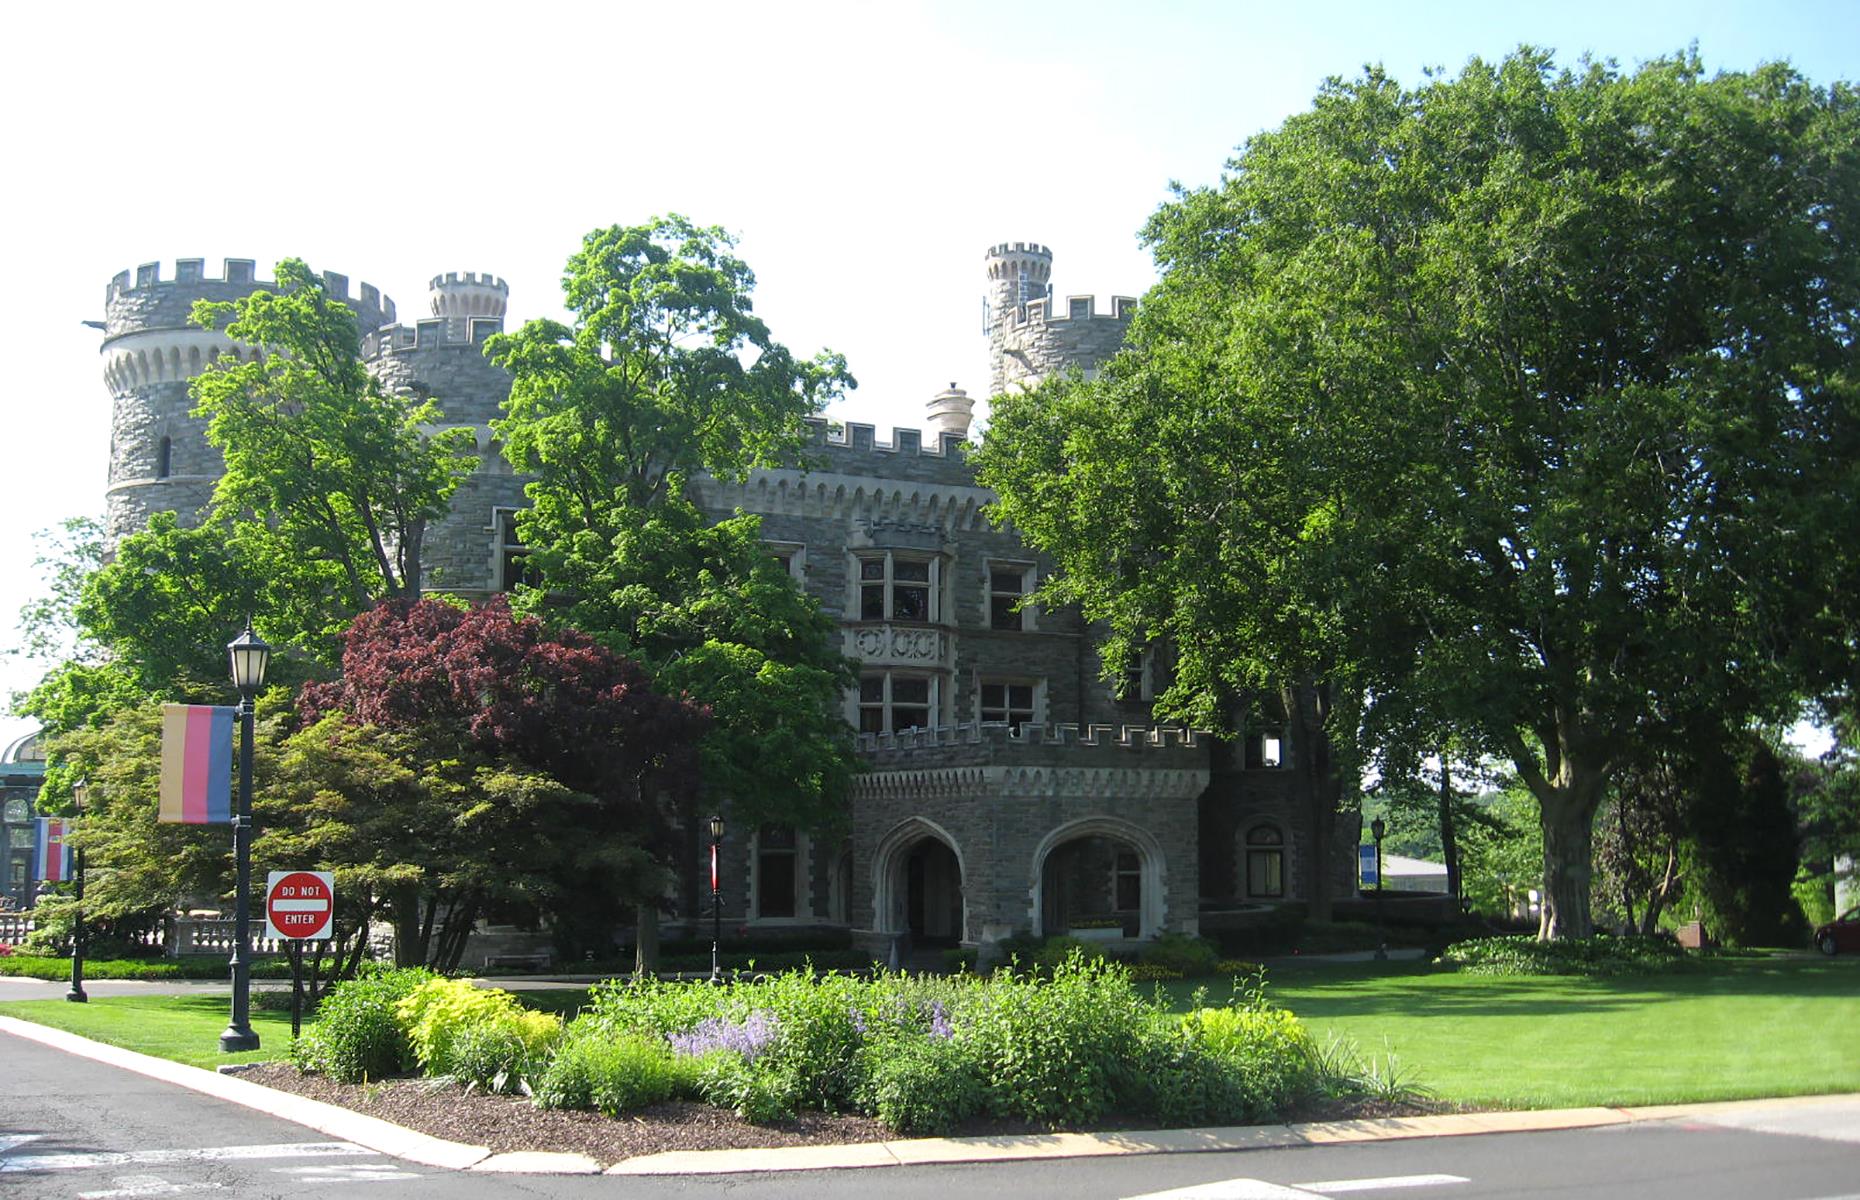 <p>You’ll find this 19th-century castle on the grounds of Arcadia University in Glenside. It belonged to William Welsh Harrison, who built the lavish property after his former estate was ravaged by a fire in 1893. He recruited young architect Horace Trumbauer who modeled his creation after majestic Alnwick Castle in <a href="https://www.loveexploring.com/news/64119/things-to-do-in-northumberland">Northumberland</a>, England. <a href="https://www.loveexploring.com/gallerylist/67038/30-of-europes-most-beautiful-castles">Take a look at Europe's most beautiful castles</a>.</p>